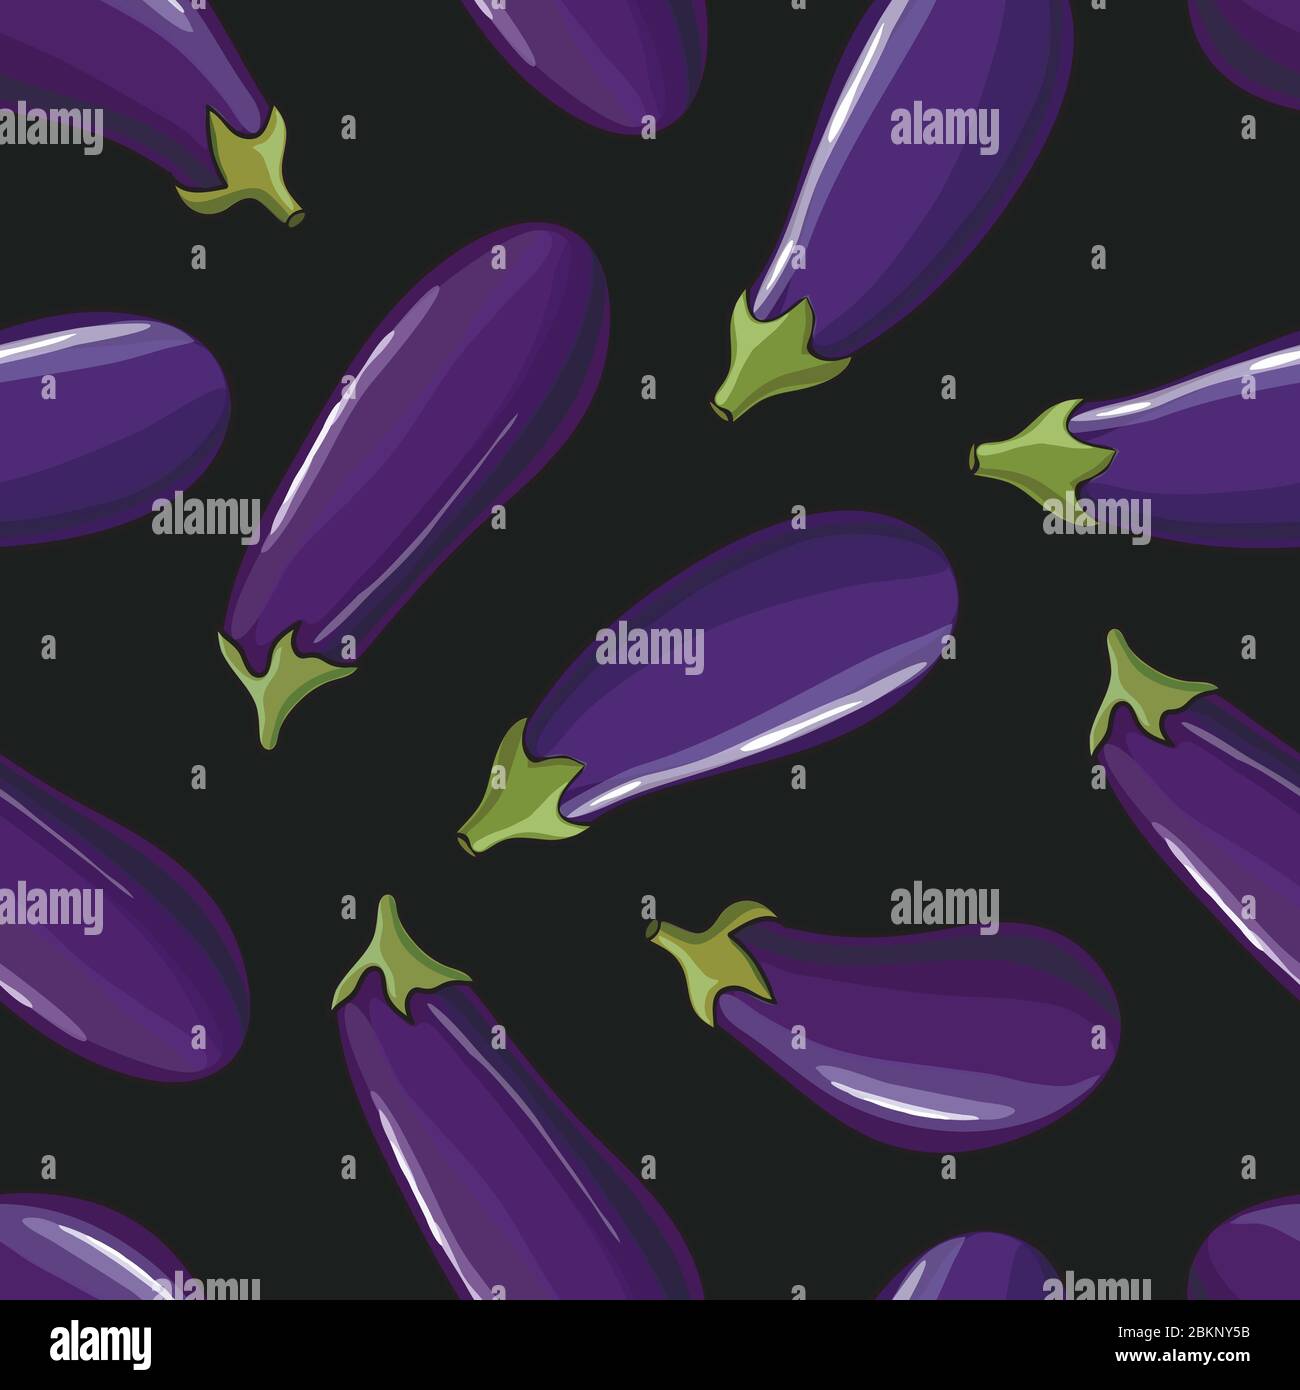 Vegetables seamless background with eggplants and cabbages. Wallpaper for vegan store. Stock Vector